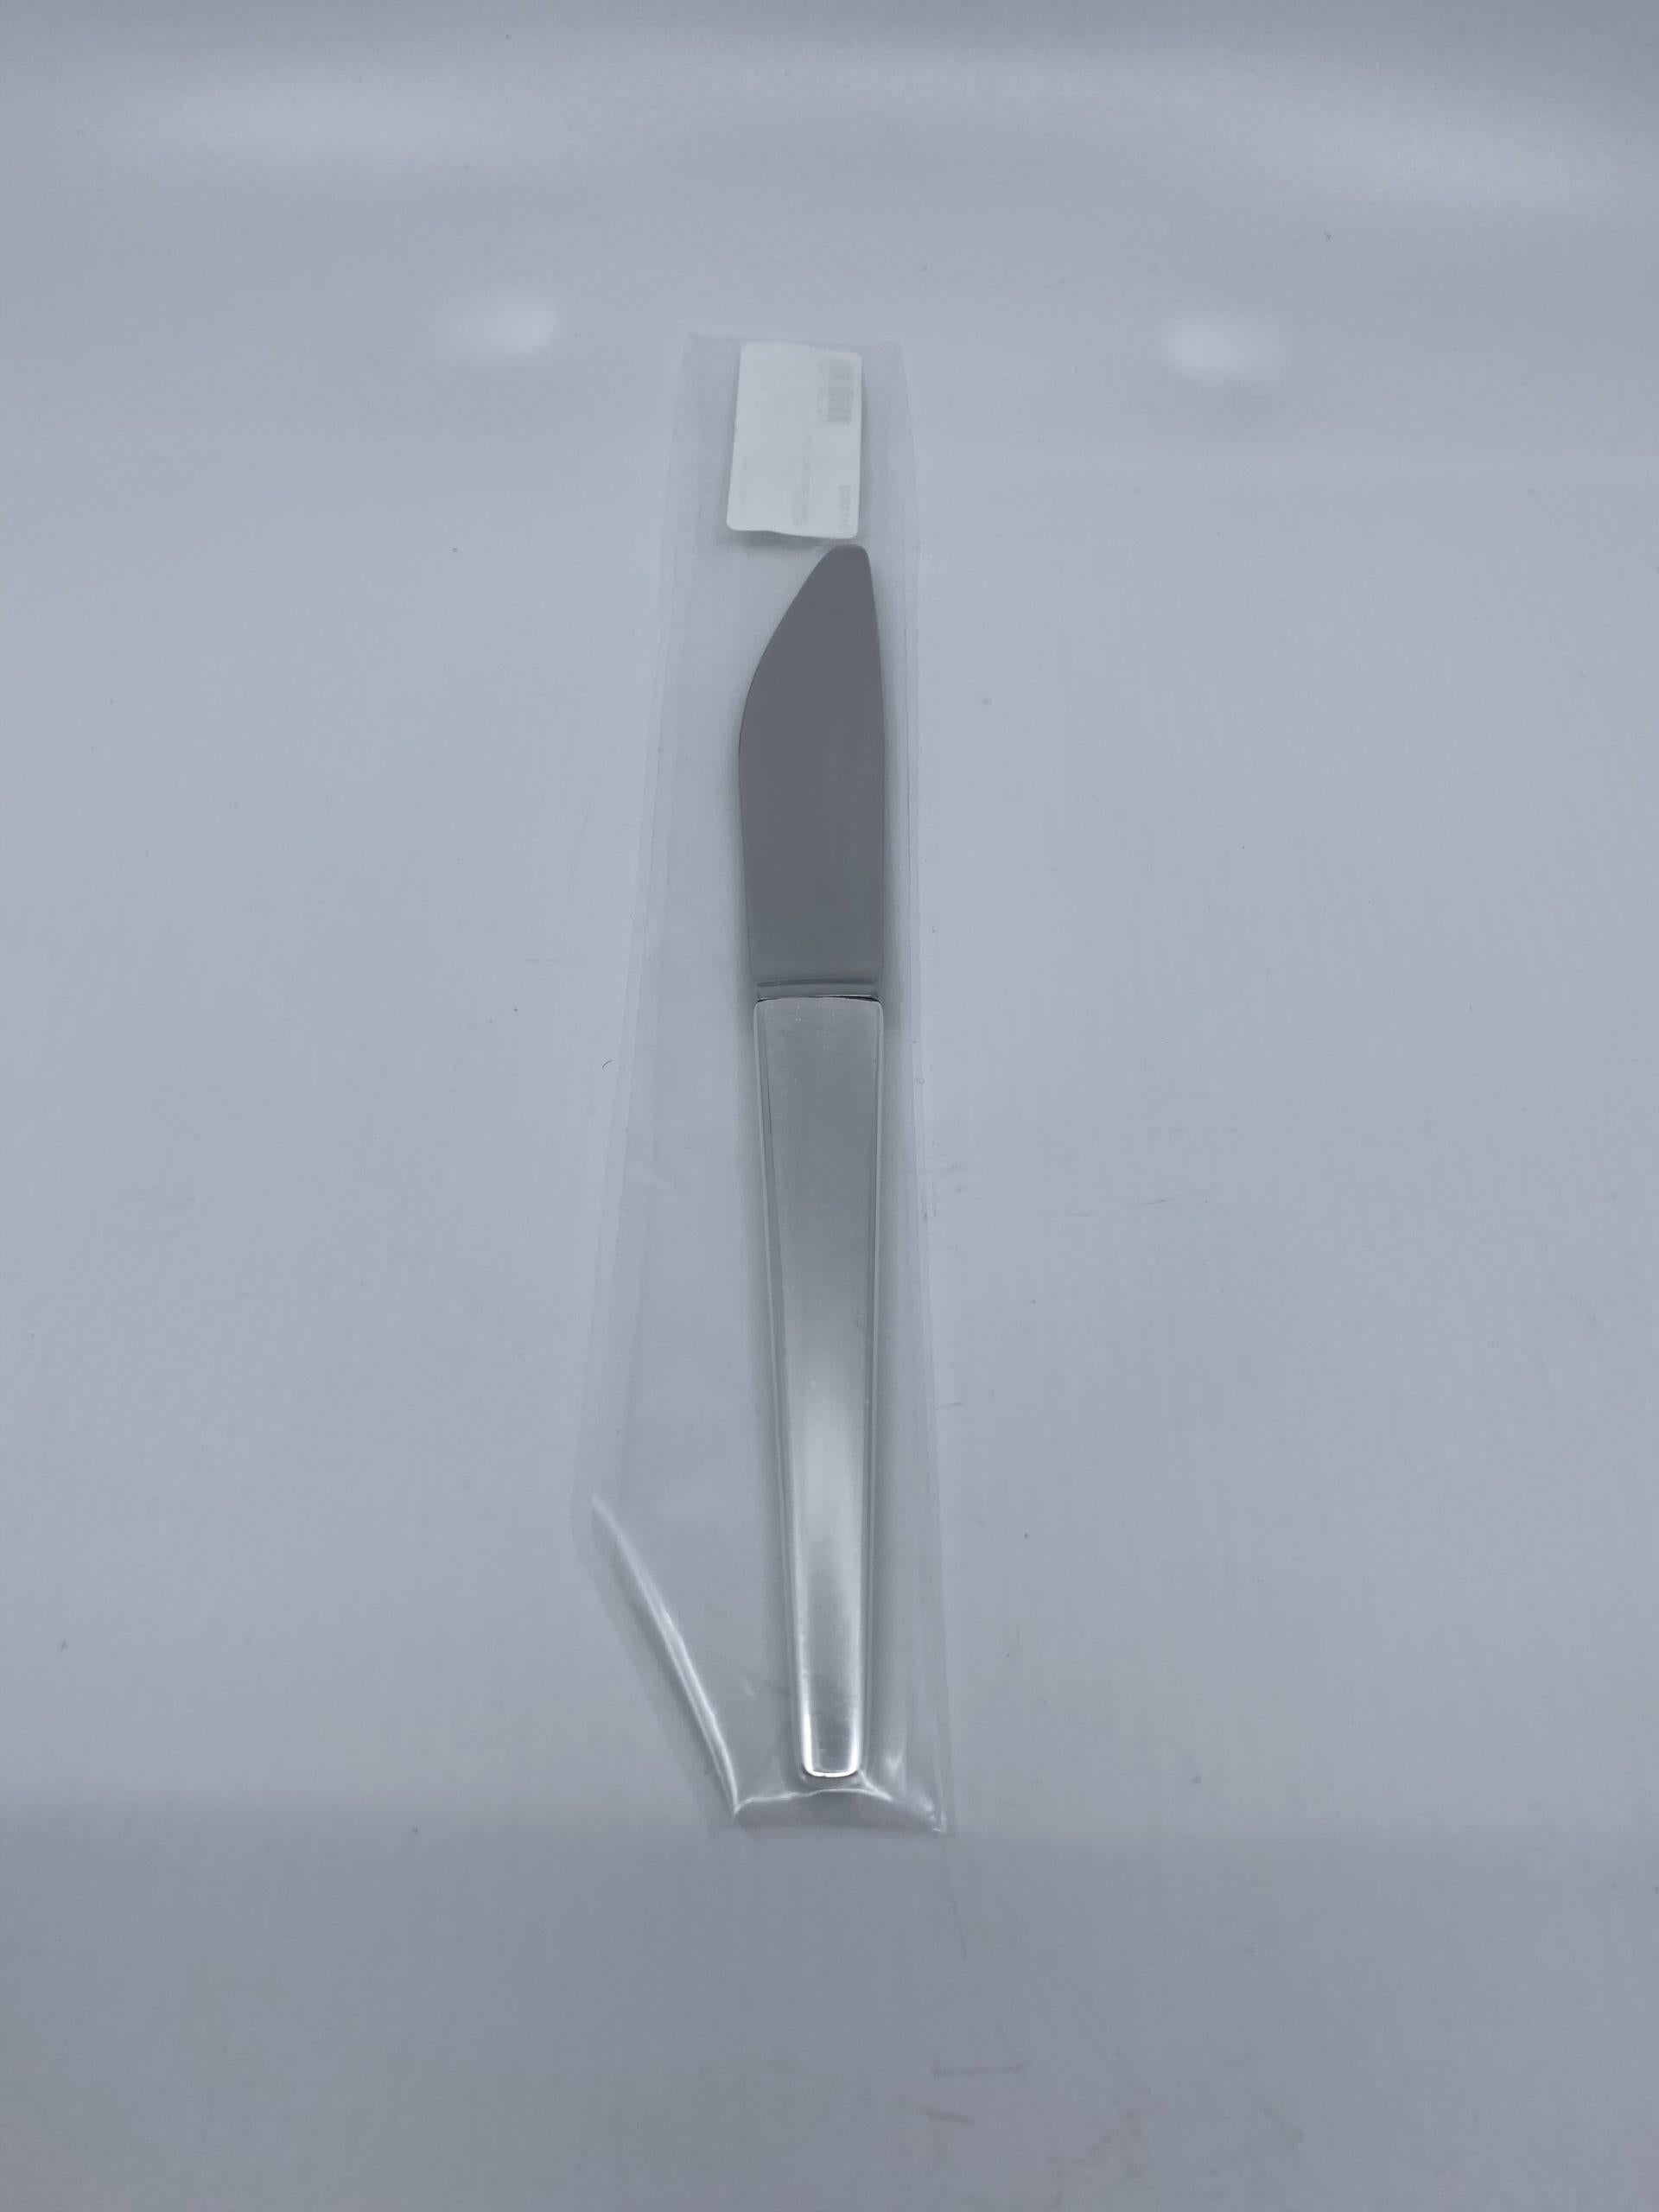 Georg Jensen dinner knife with sterling silver handle and stainless steel blade, item 013 in the Caravel pattern, design #111 by Henning Koppel from 1957. Still a very modern design, sleek and completely without decoration.

Additional